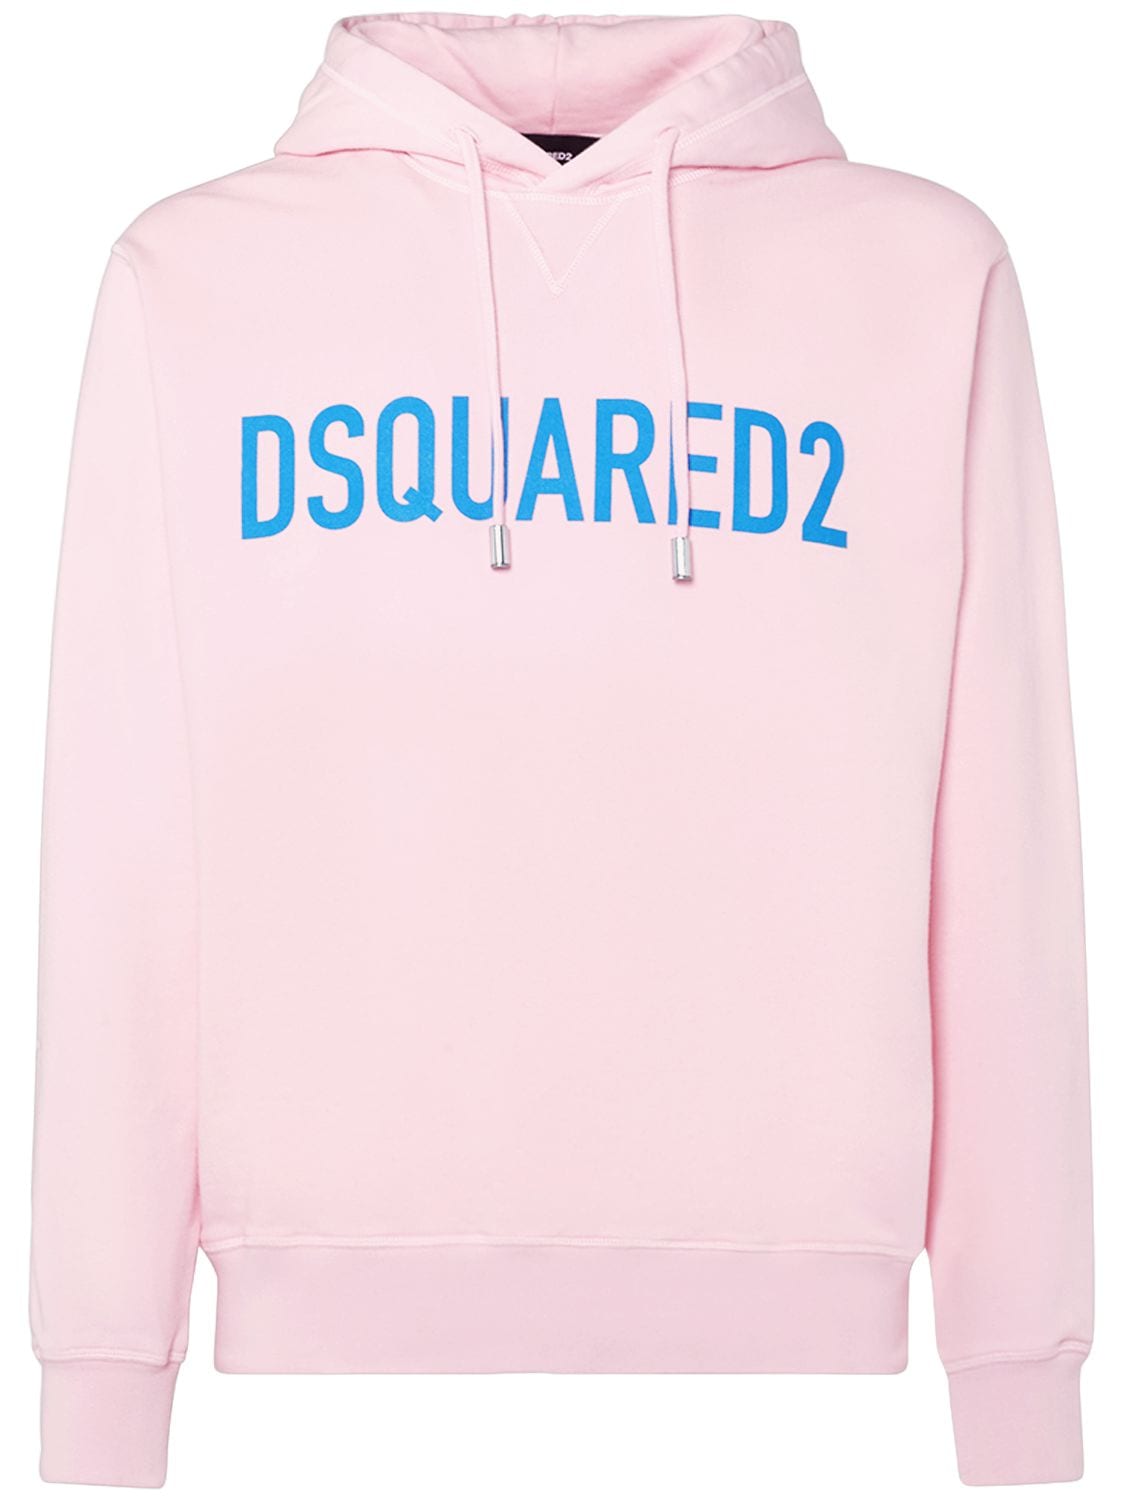 DSQUARED2 LOGO COTTON JERSEY HOODIE